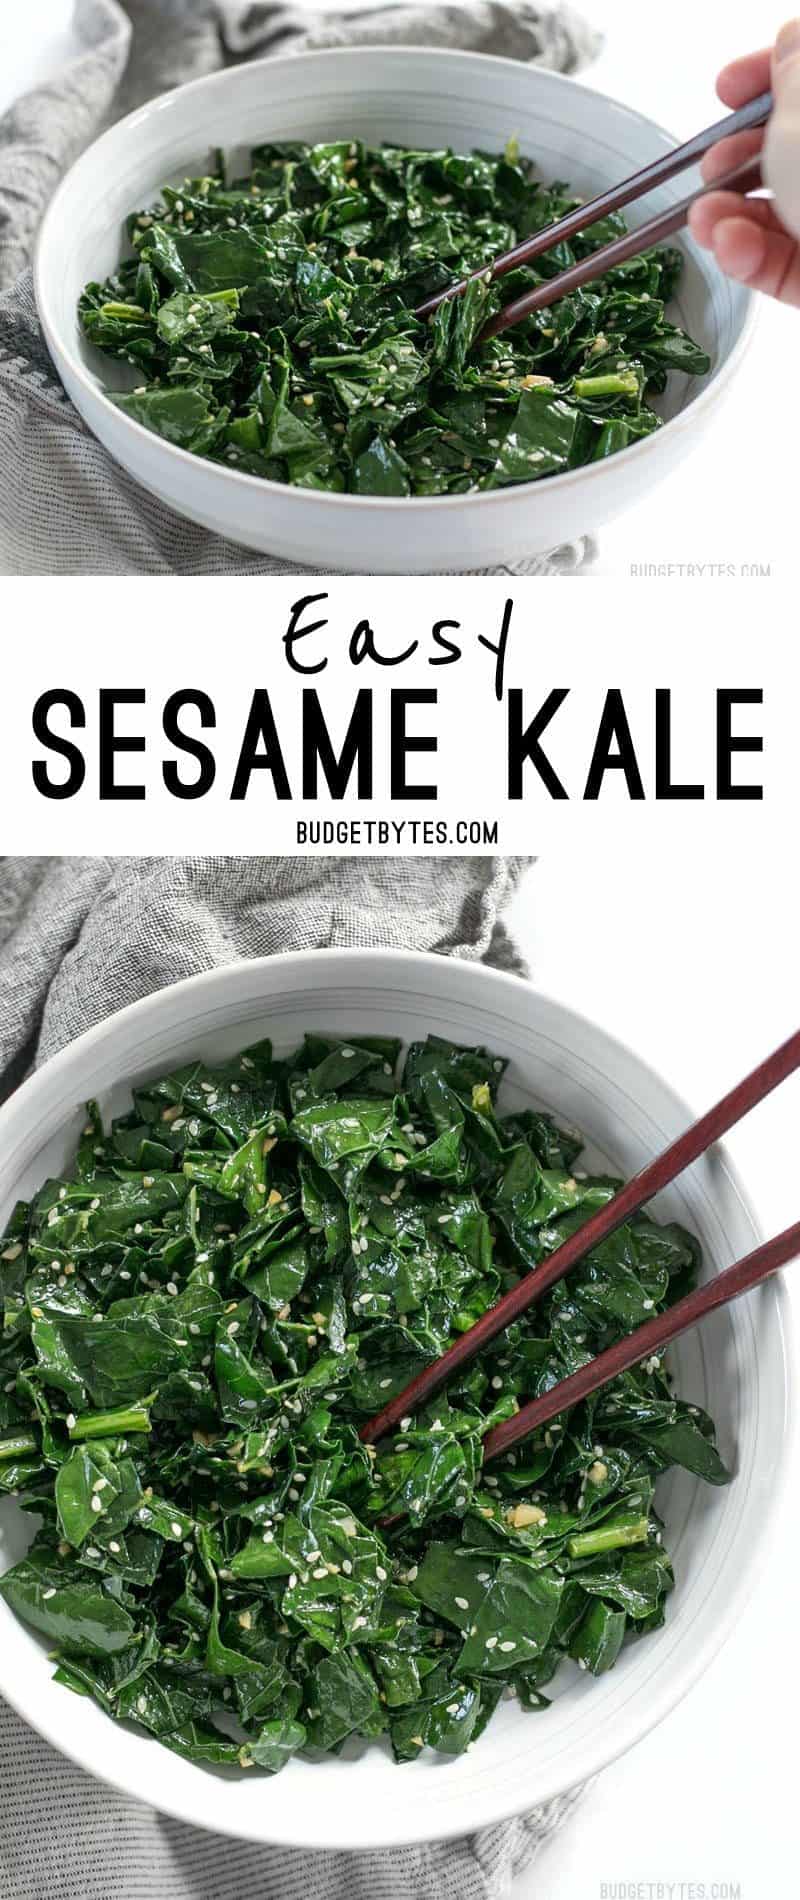 Sesame Kale is a quick and easy side dish that pairs perfectly with any Asian inspired meal. BudgetBytes.com